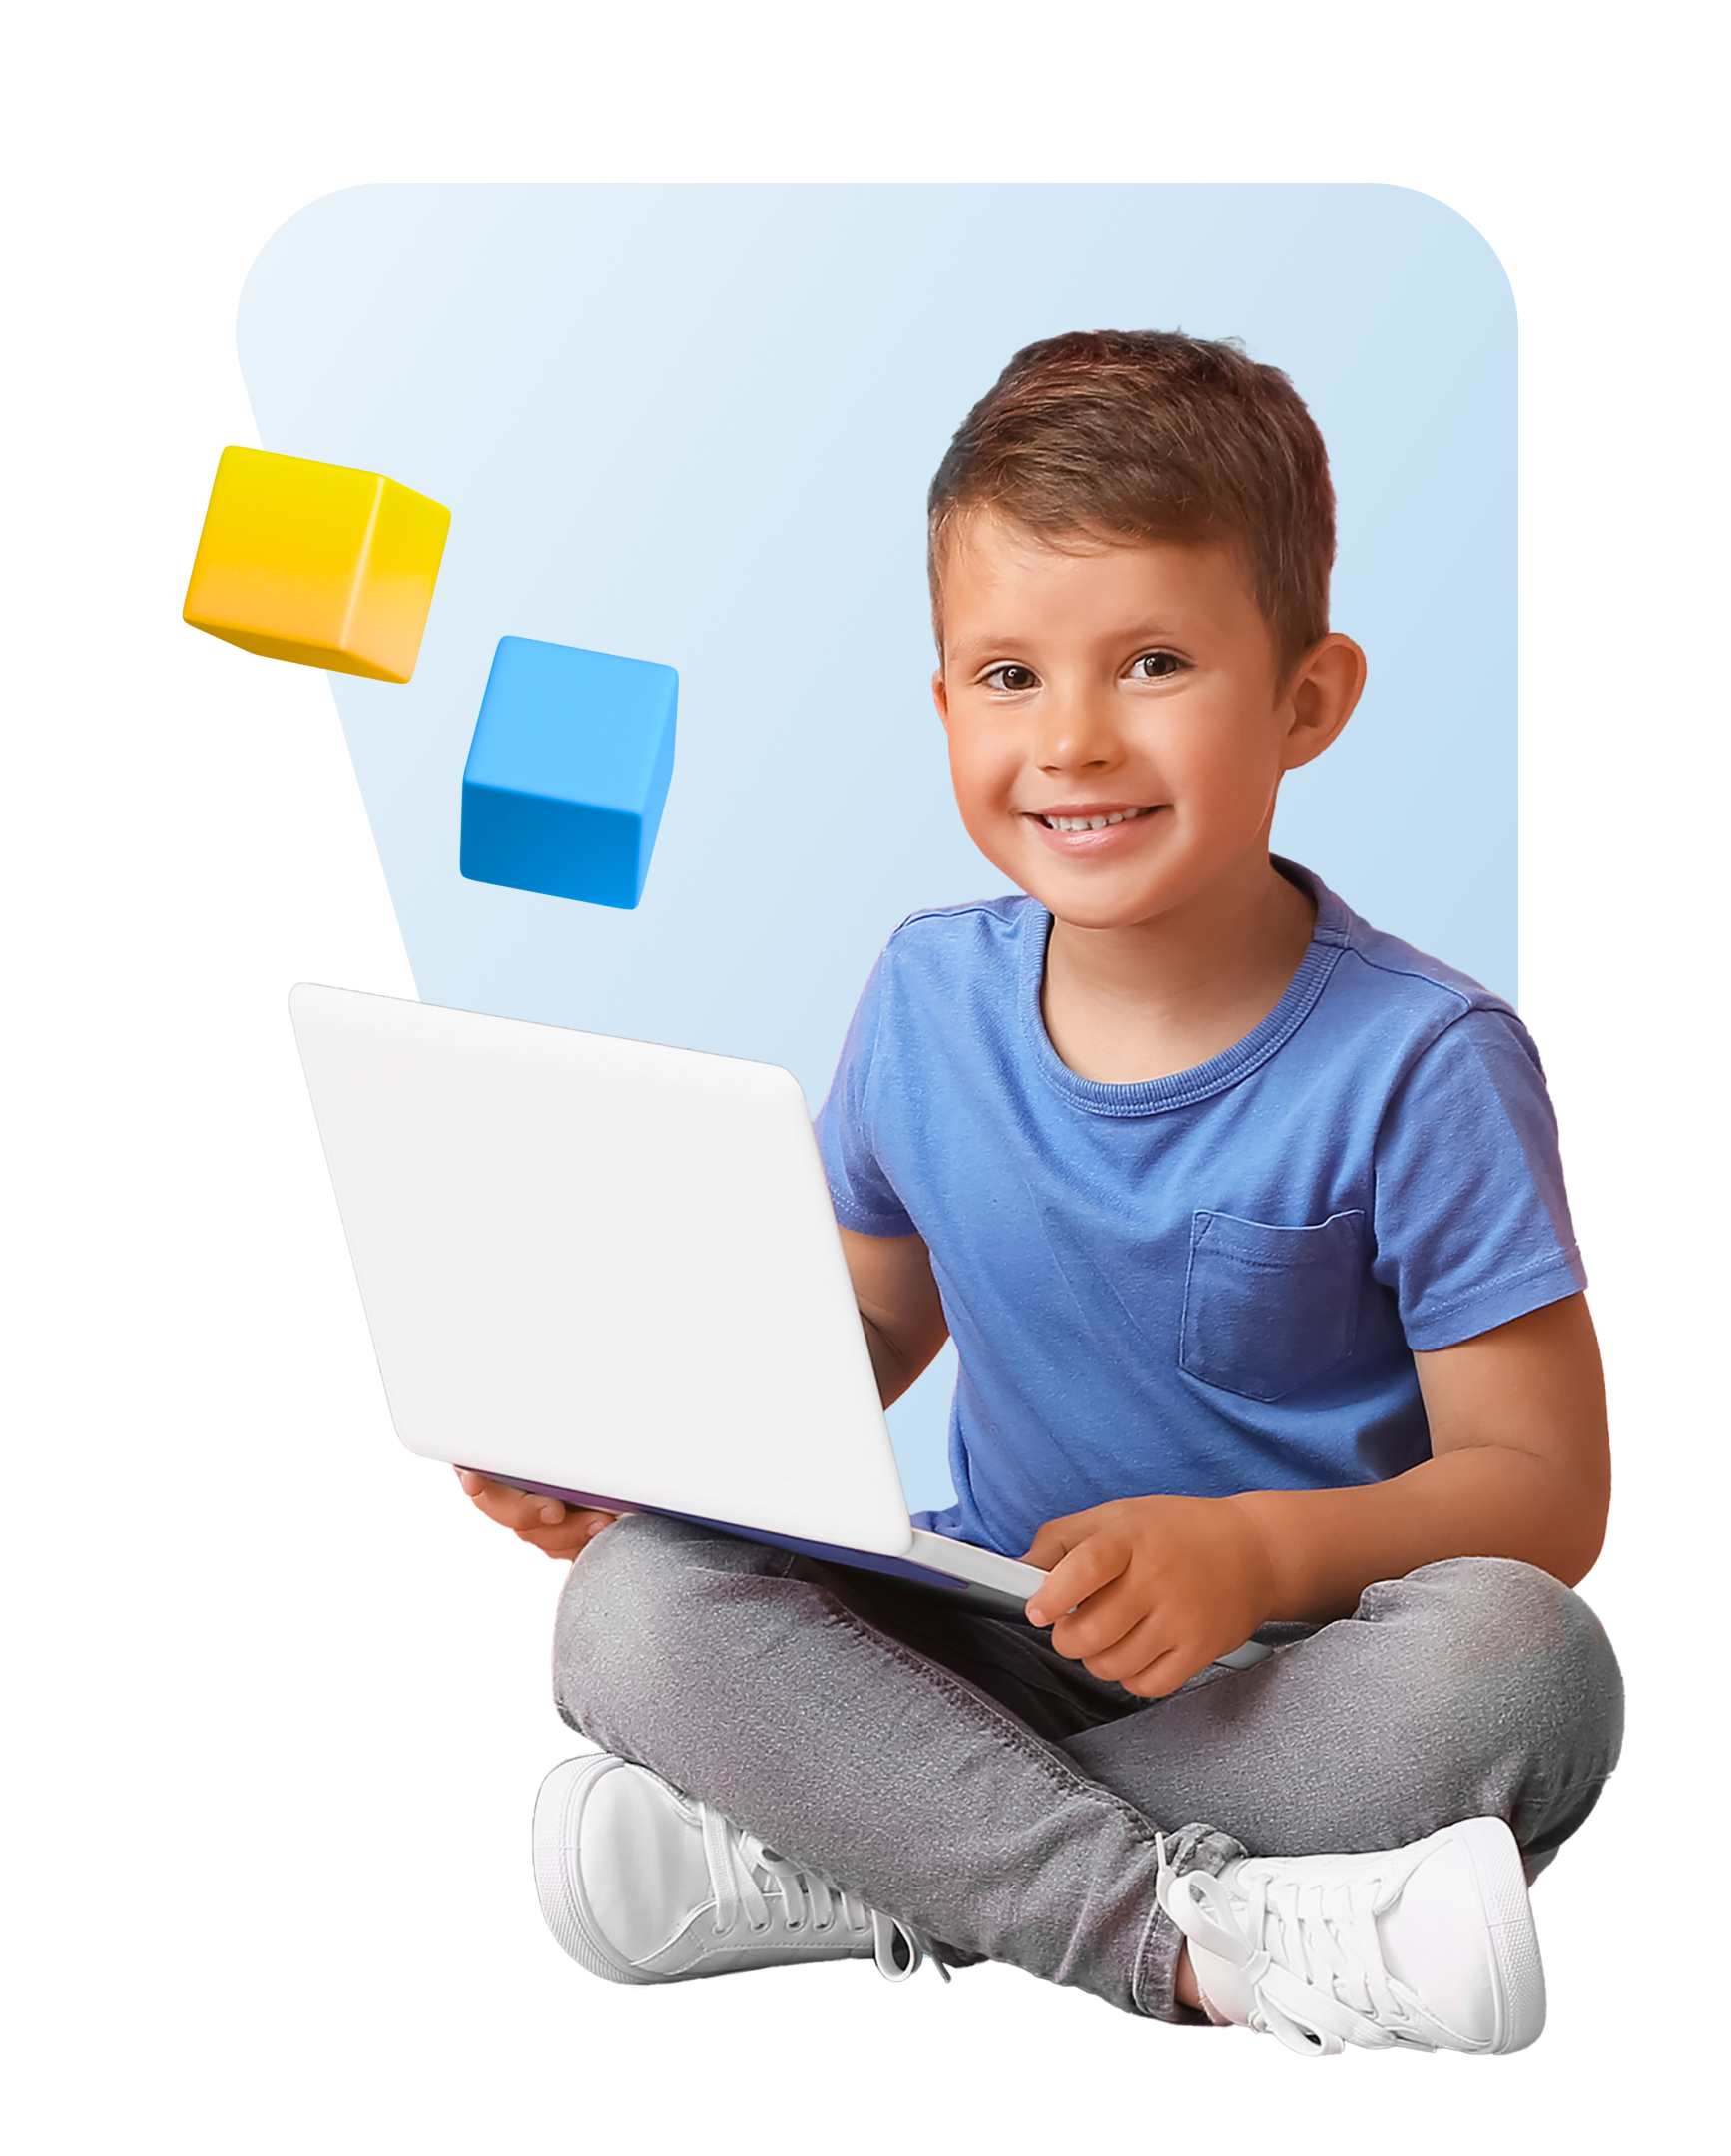 Young boy with laptop and building blocks